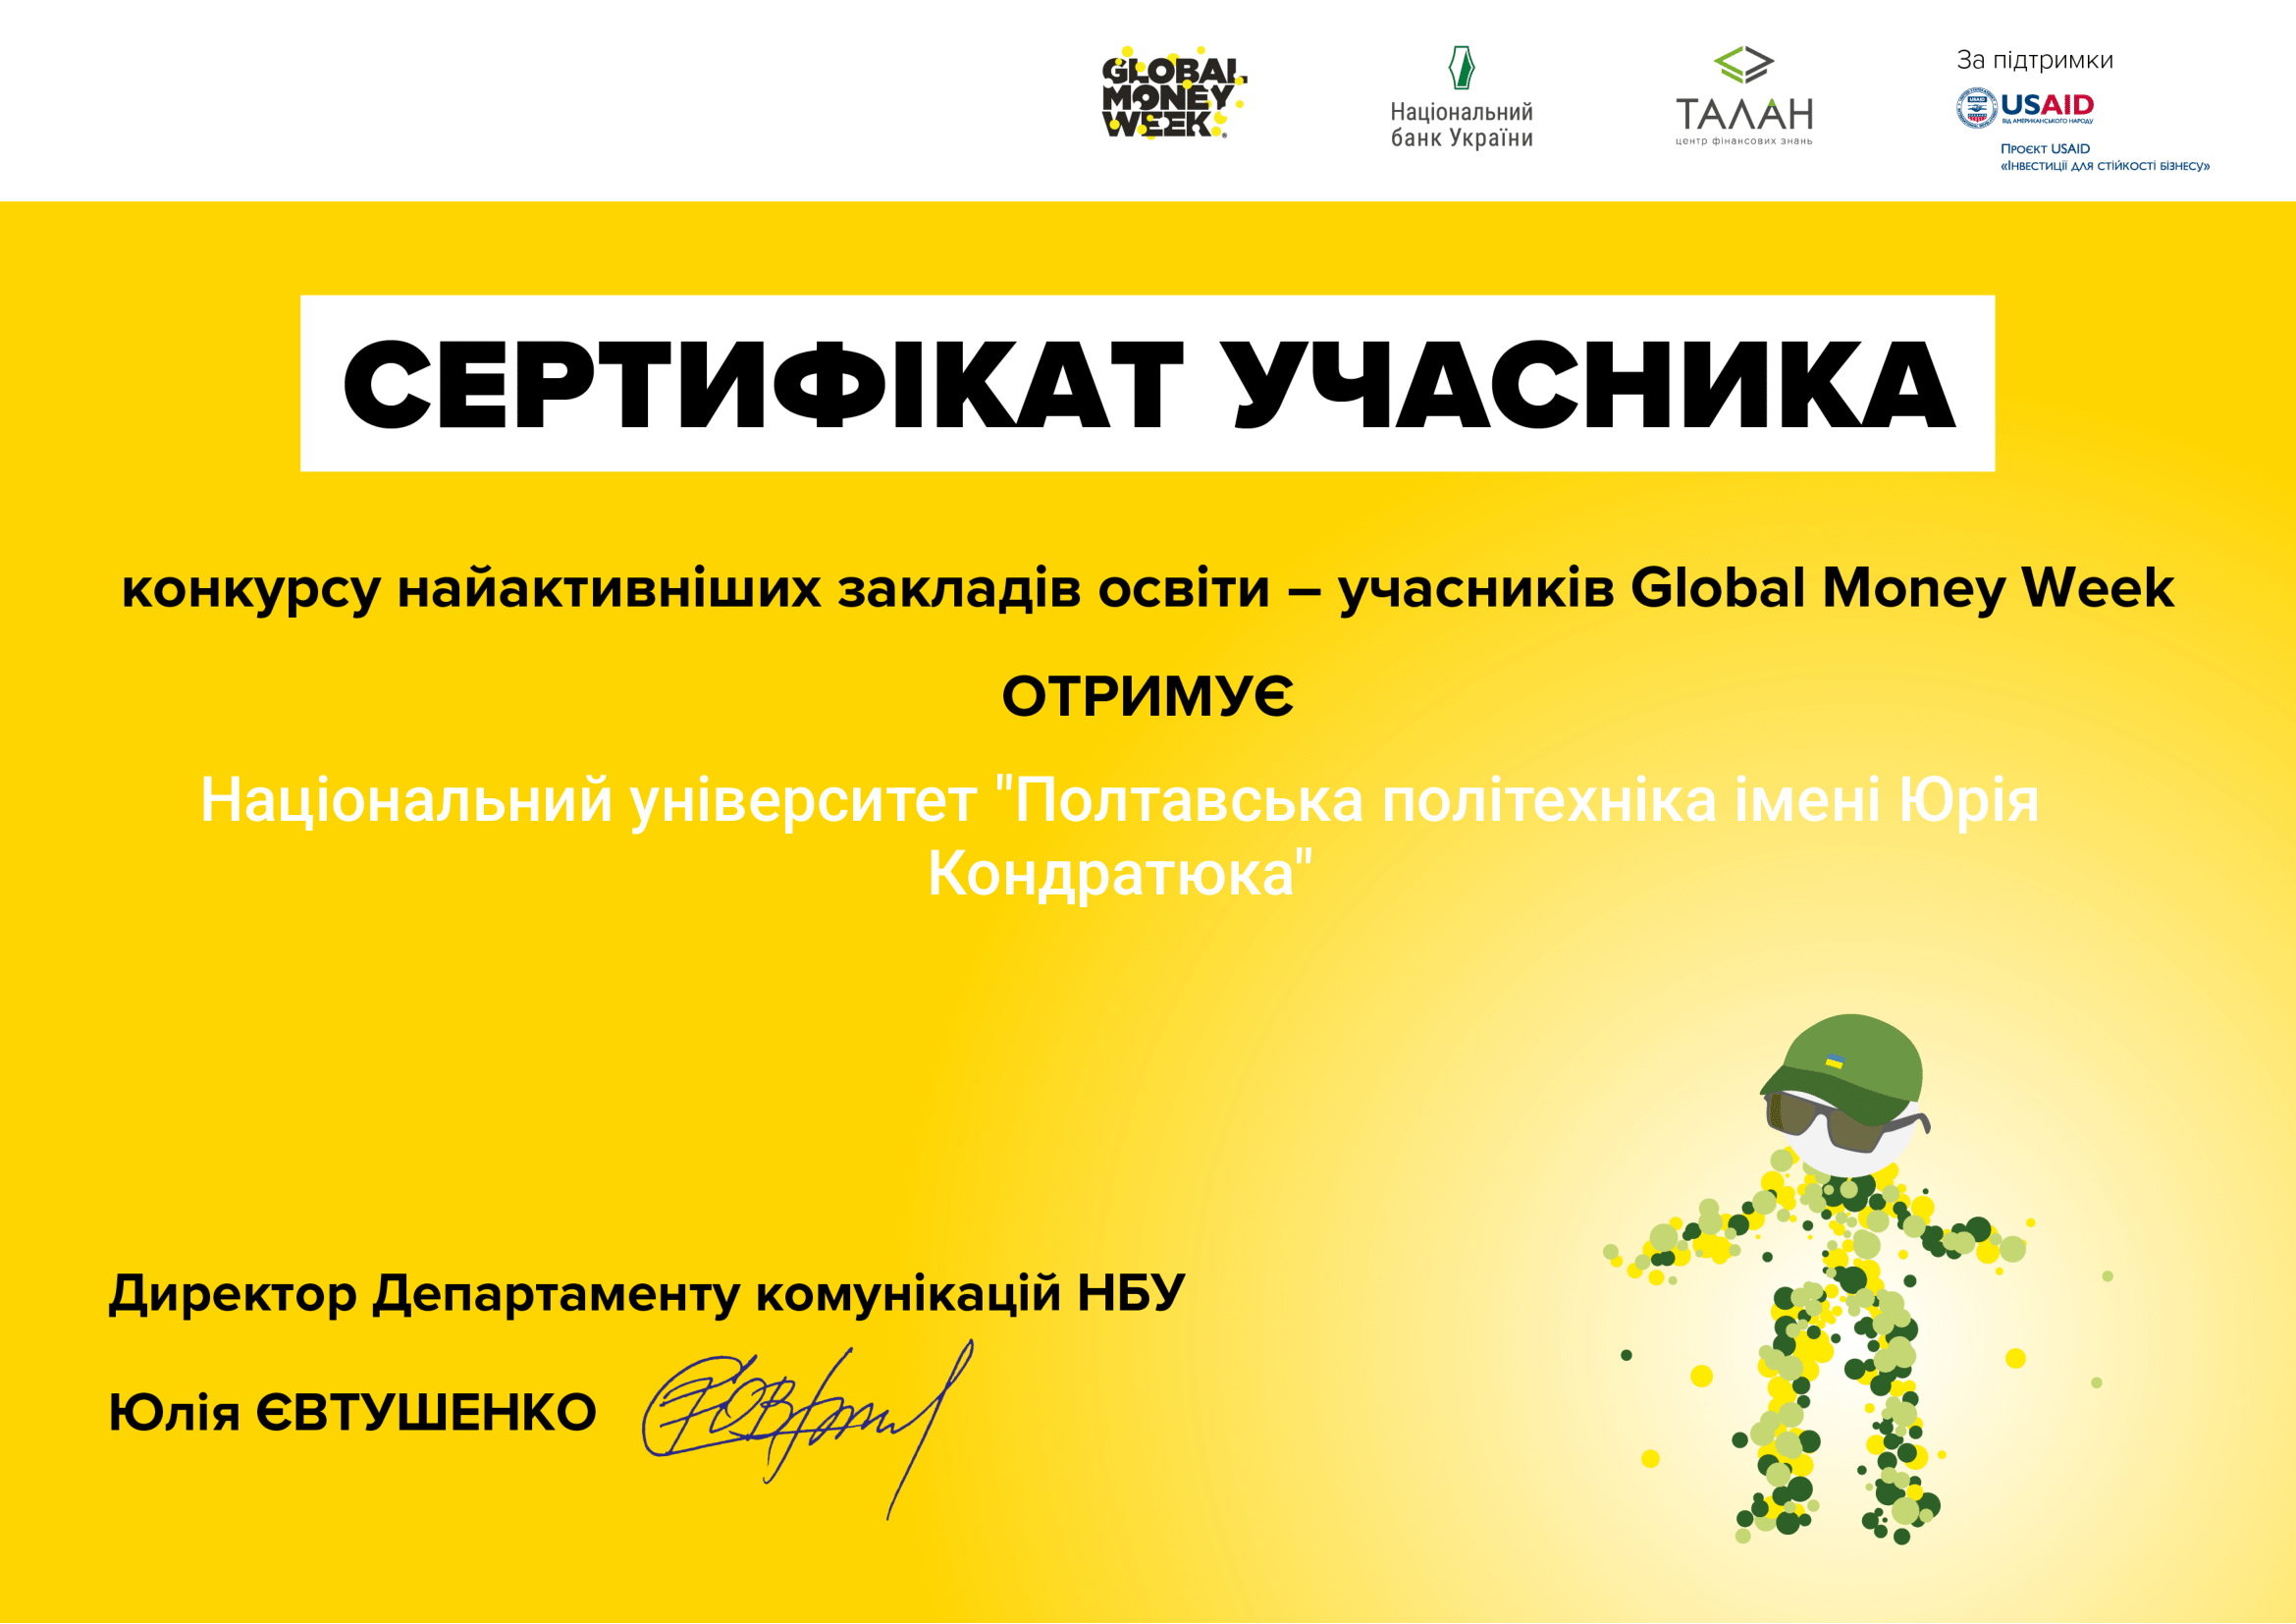 Polytechnic receives an award from the National Bank of Ukraine for its active participation in Global Money Week